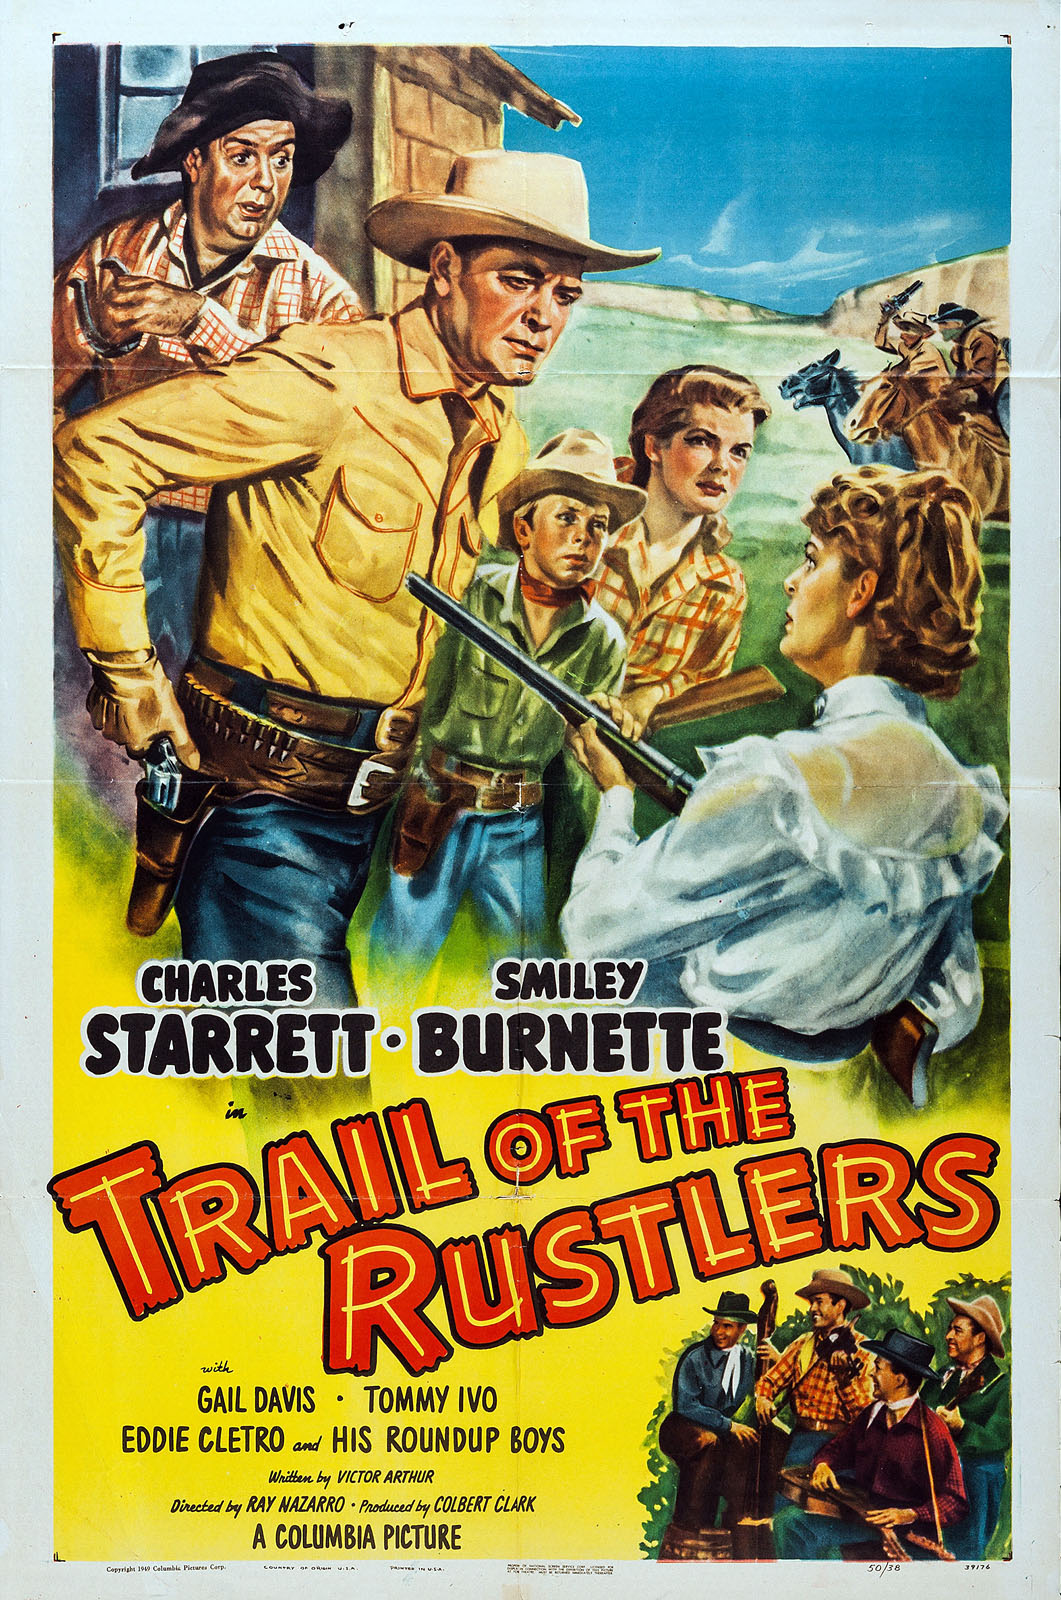 TRAIL OF THE RUSTLERS